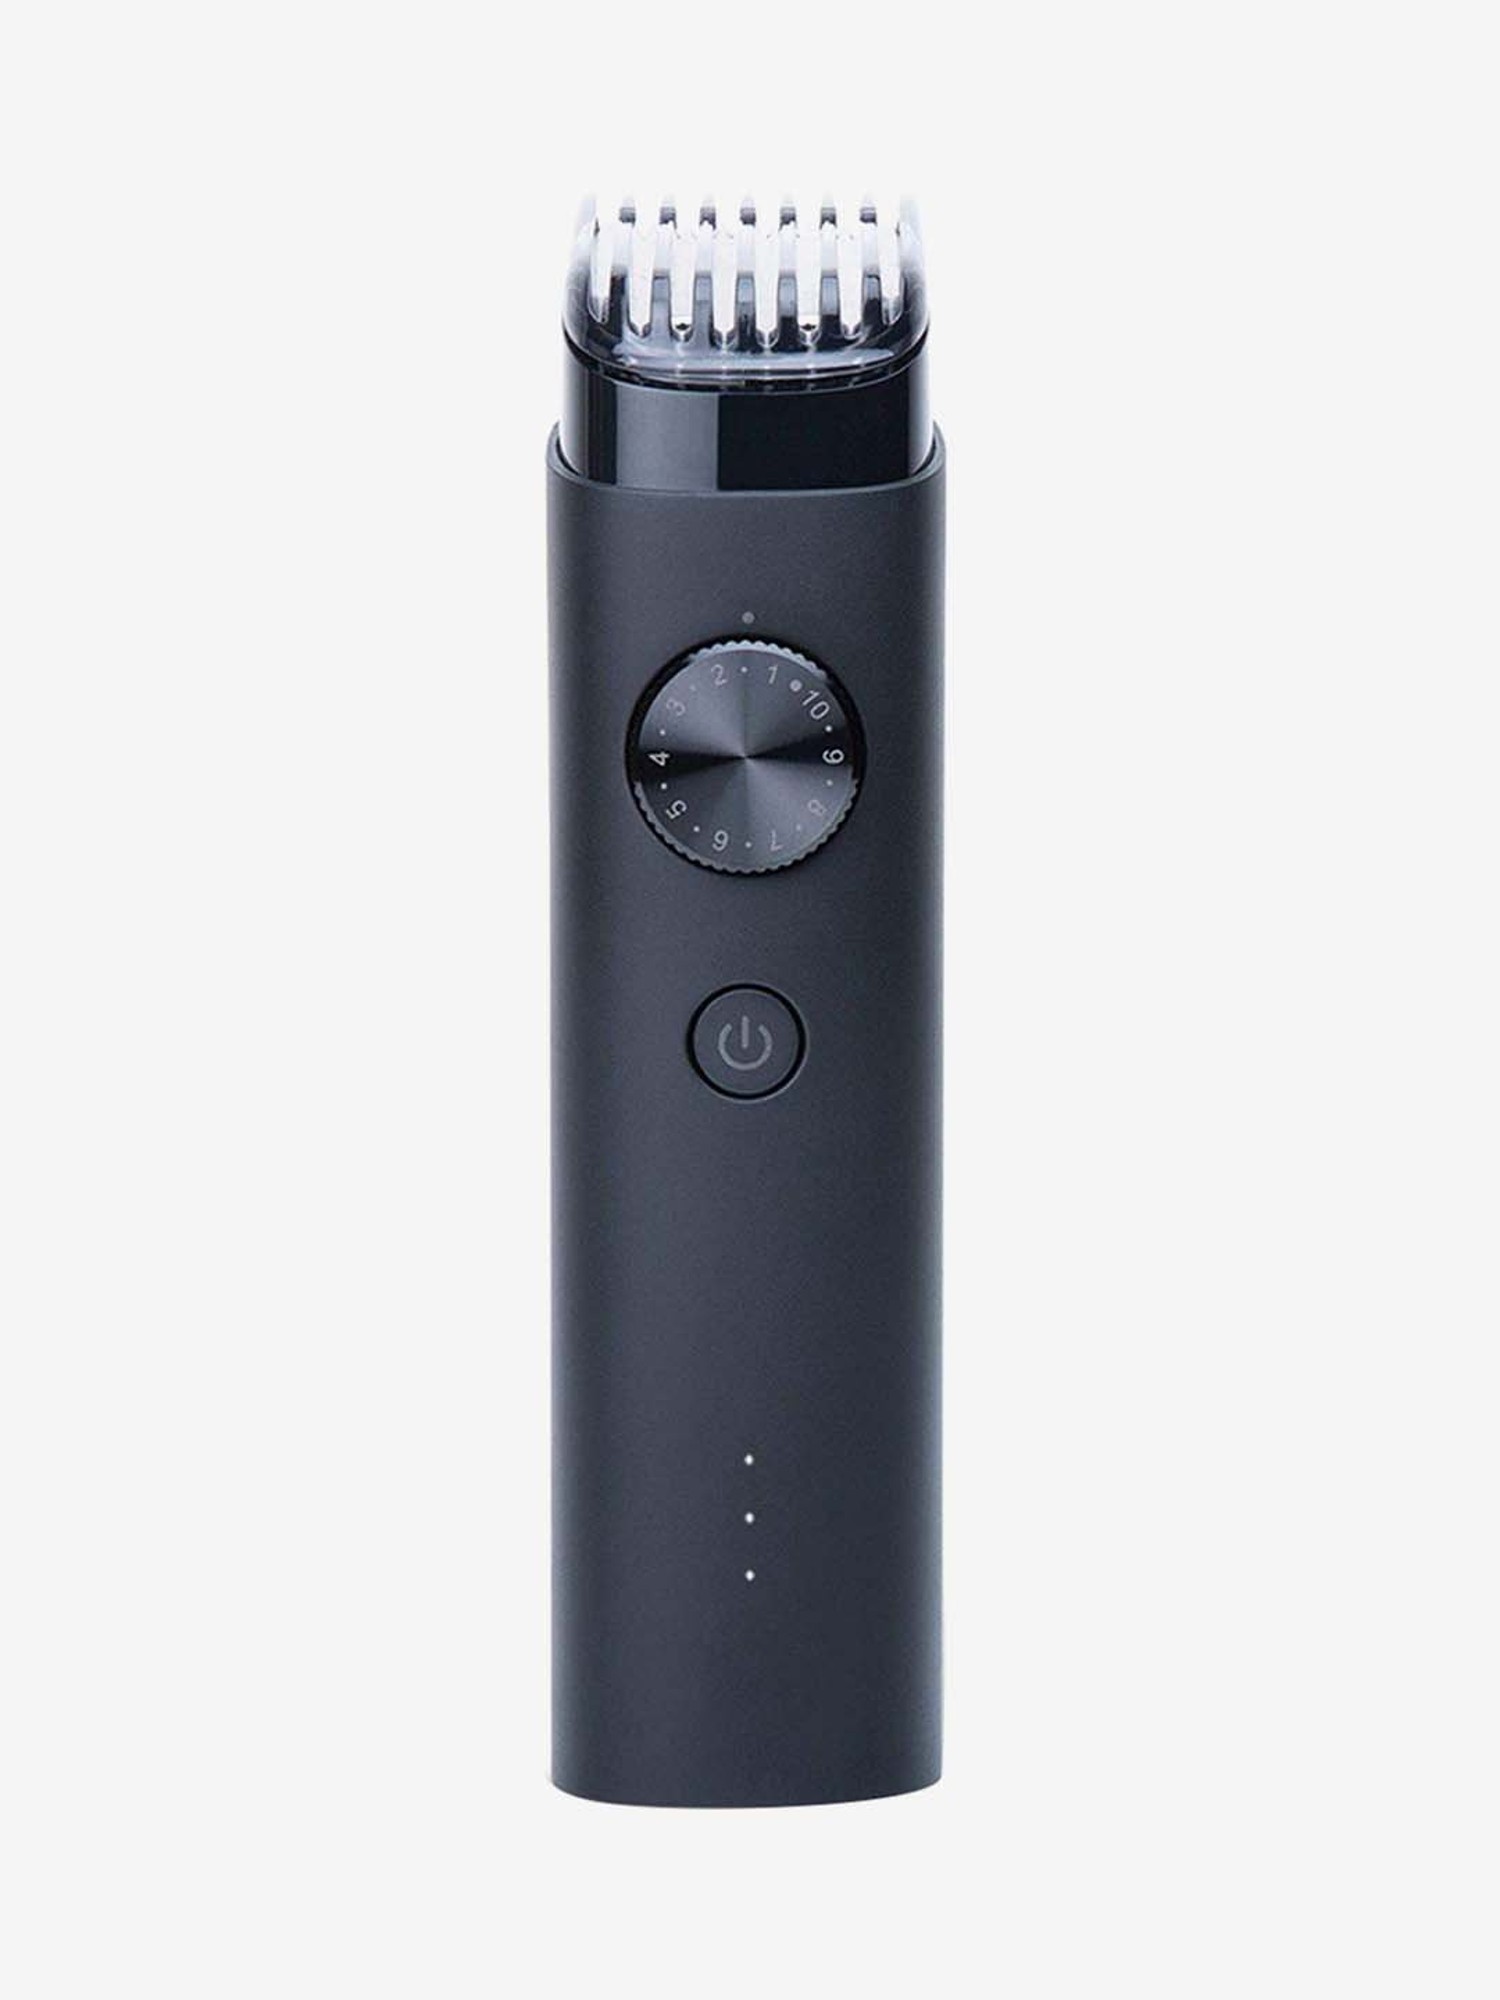 shaving beard with hair clippers